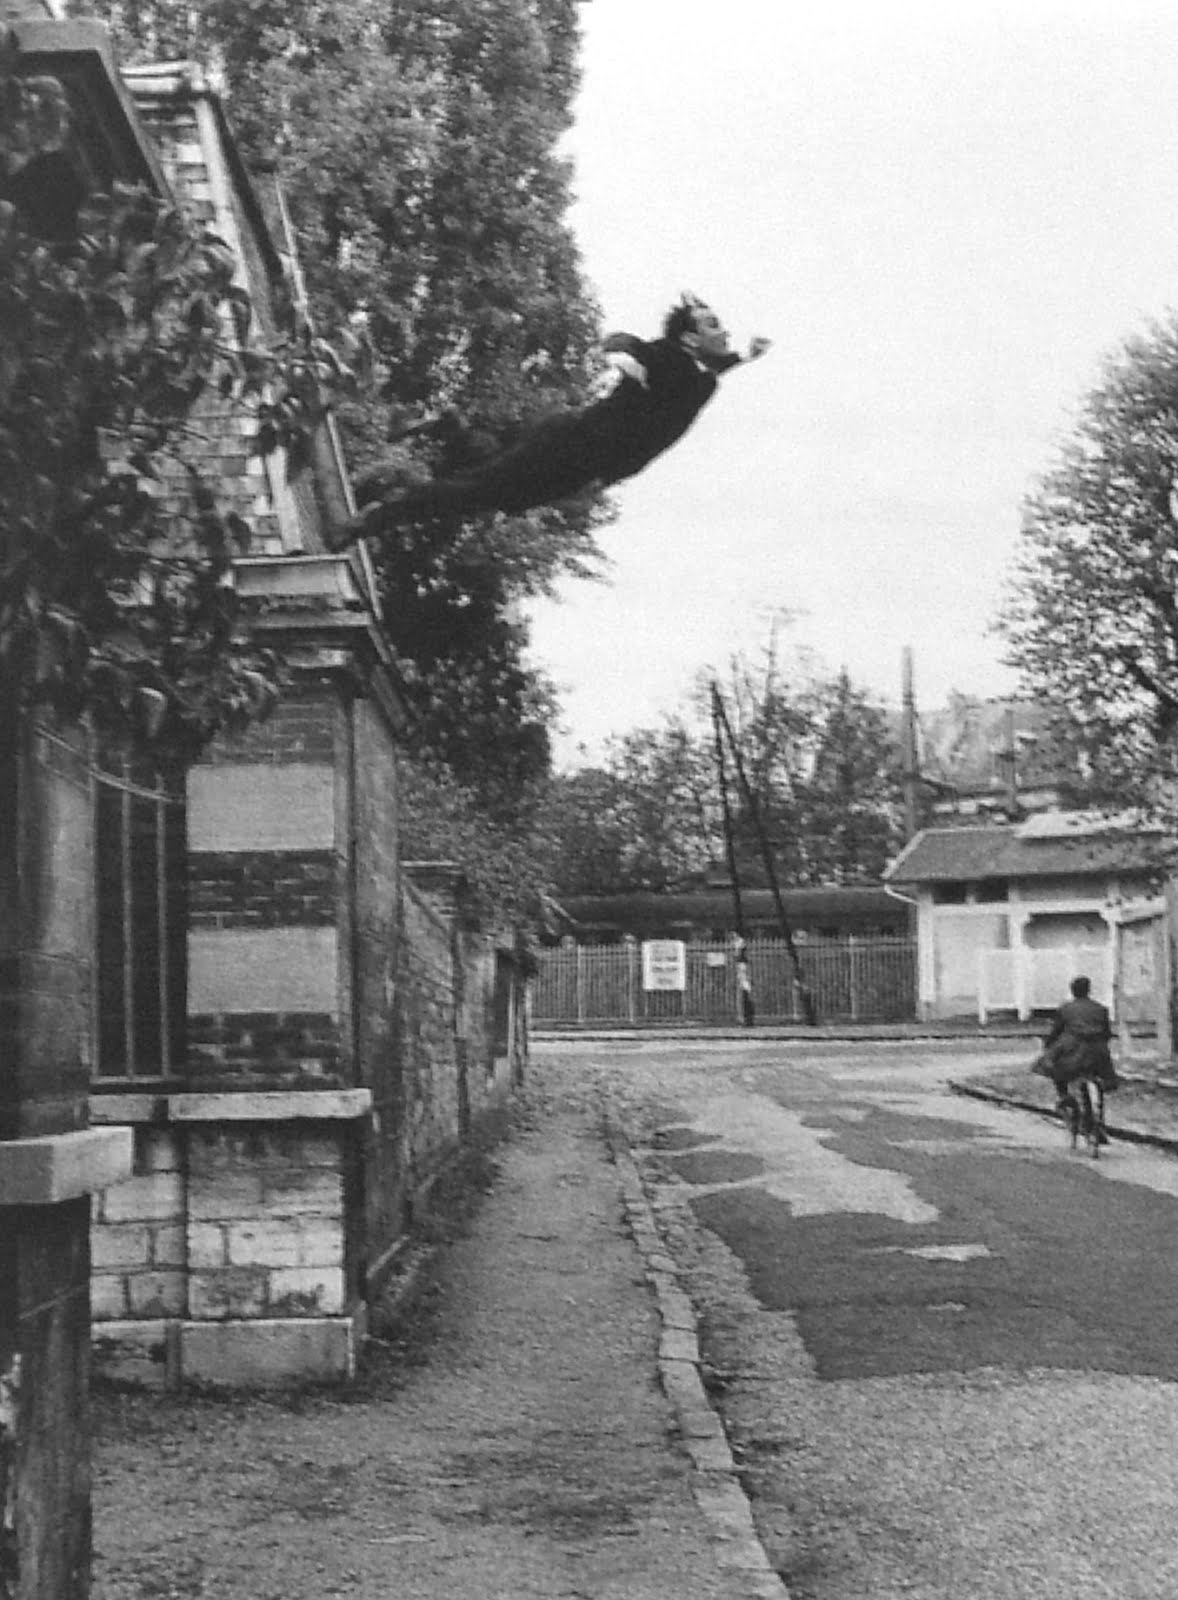 Leap into the Void (1960) by Yves Klein